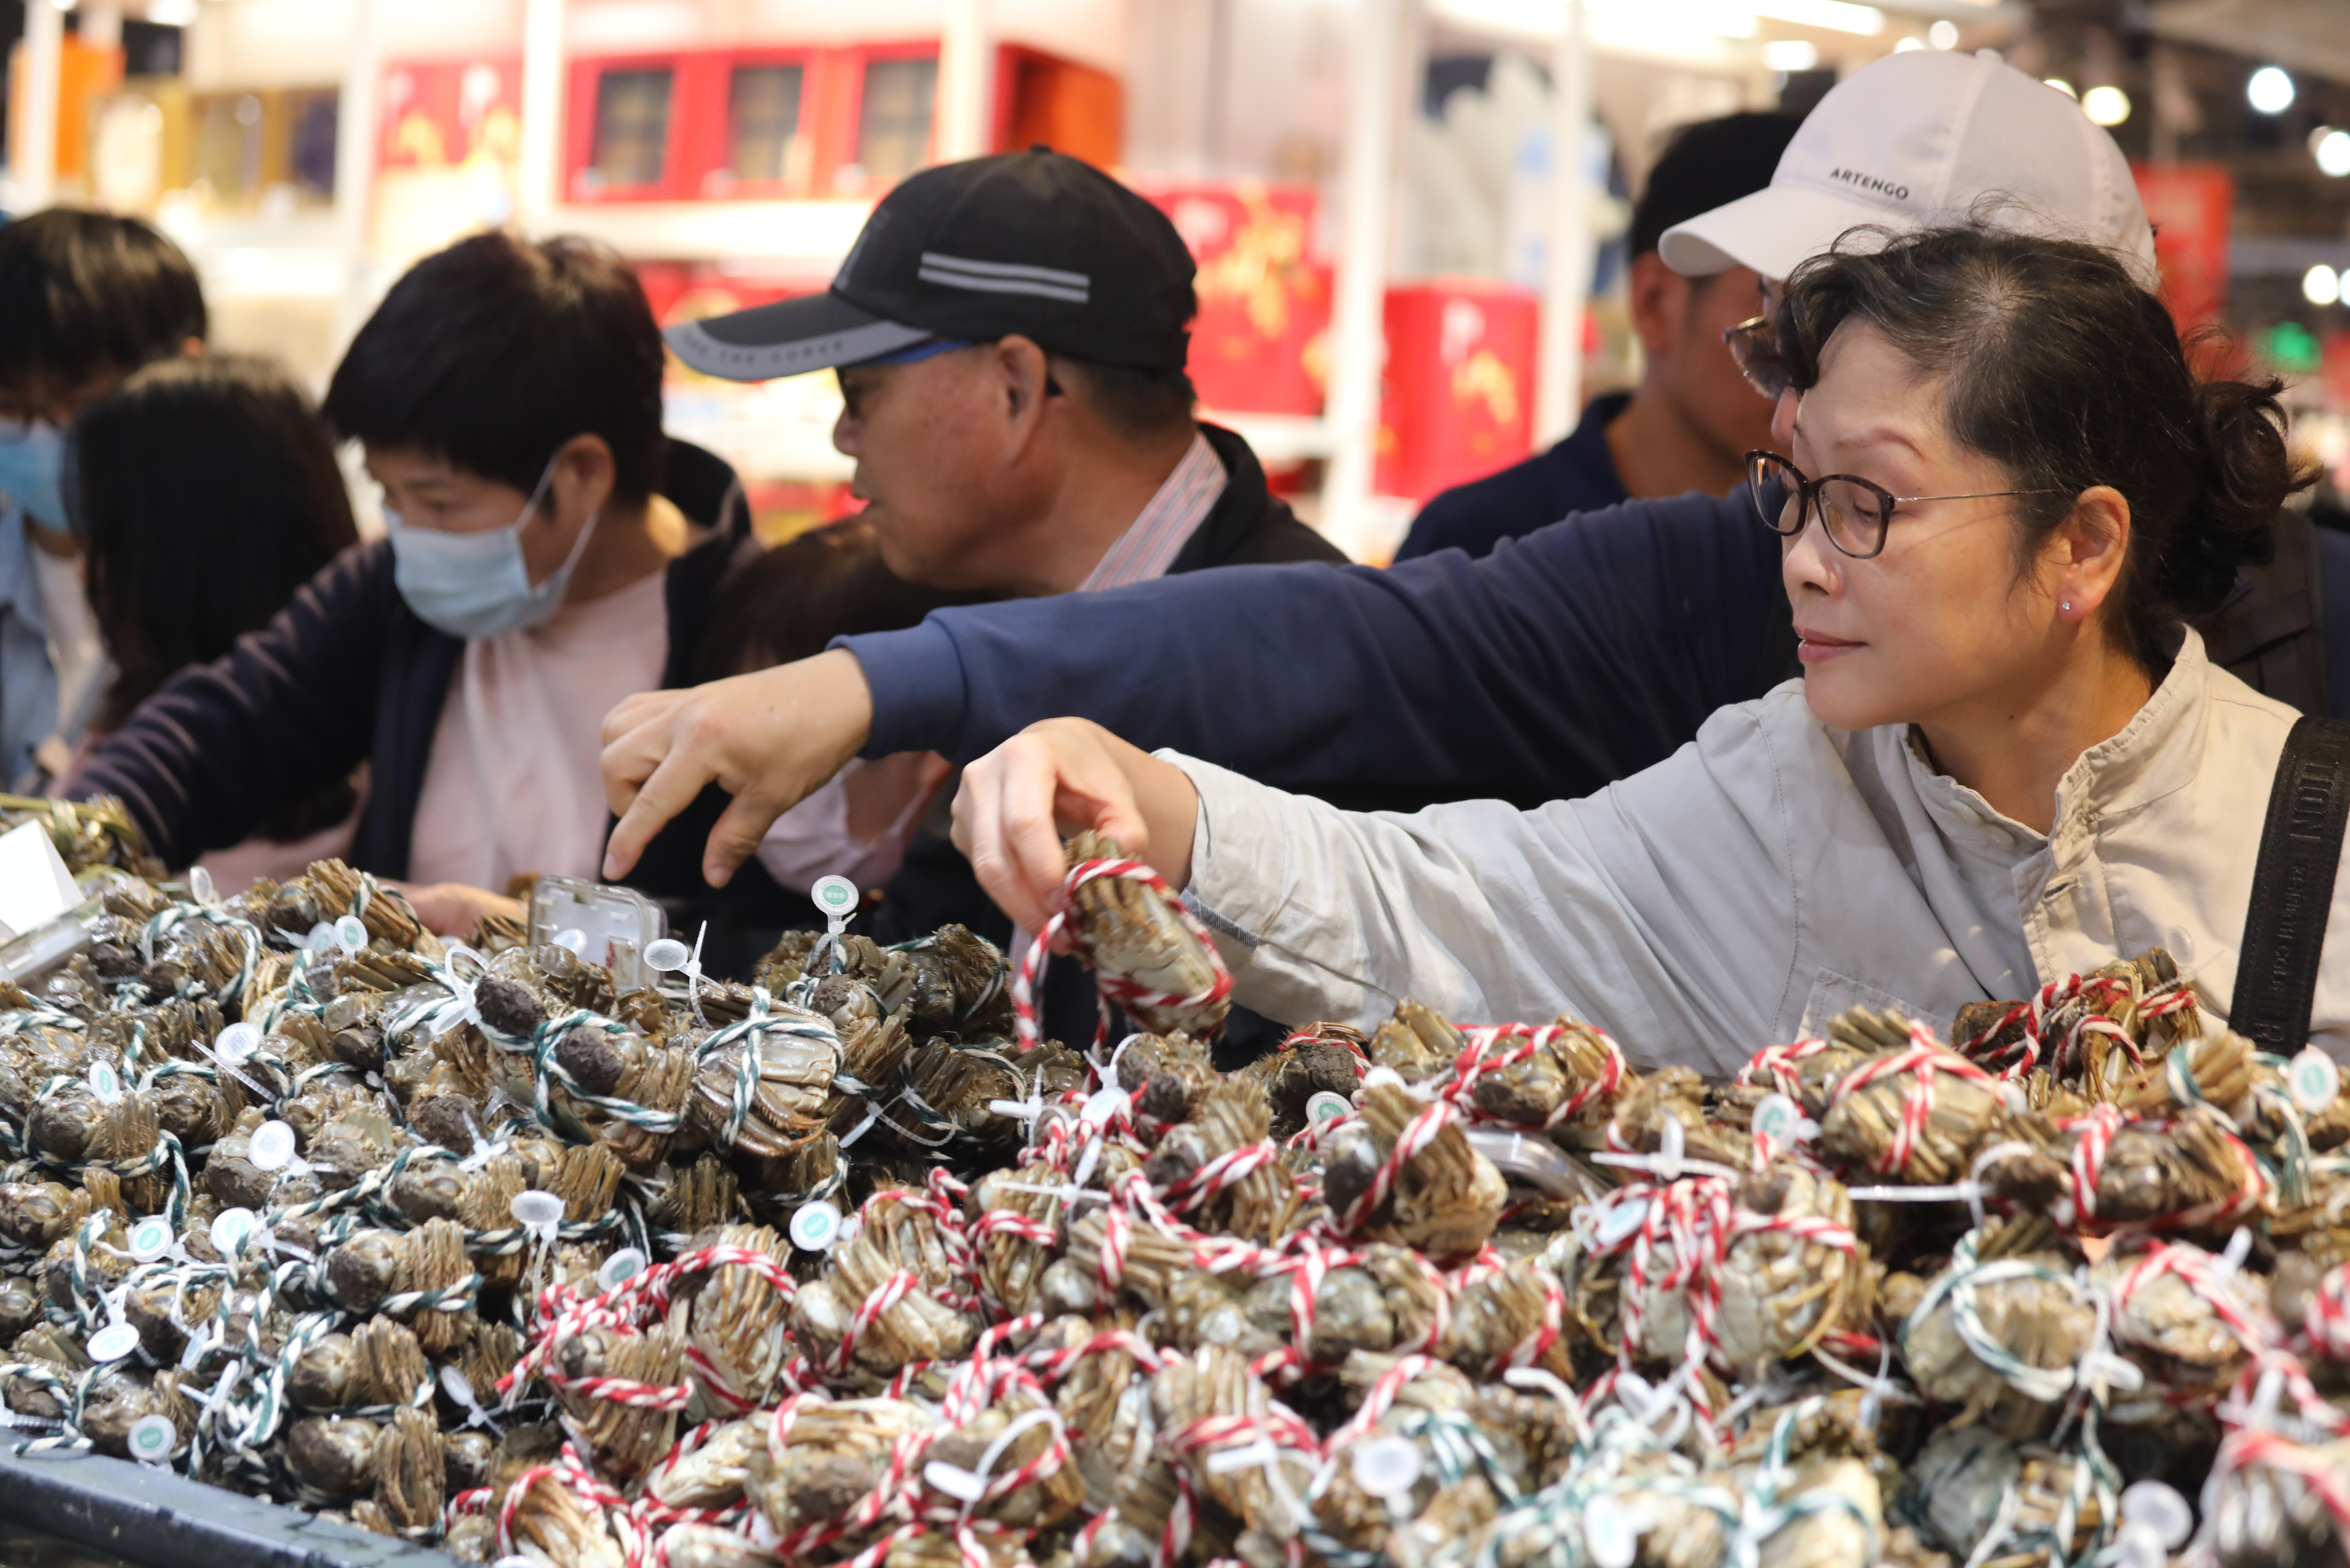 Hema Xiansheng’s supermarket in Shenzhen’s Futian district is popular among Hongkongers for its crabs. Some in Hong Kong seem to expect mainlanders to spend in Hong Kong, without wanting Hongkongers to spend in Shenzhen. Photo: Xiaomei Chen